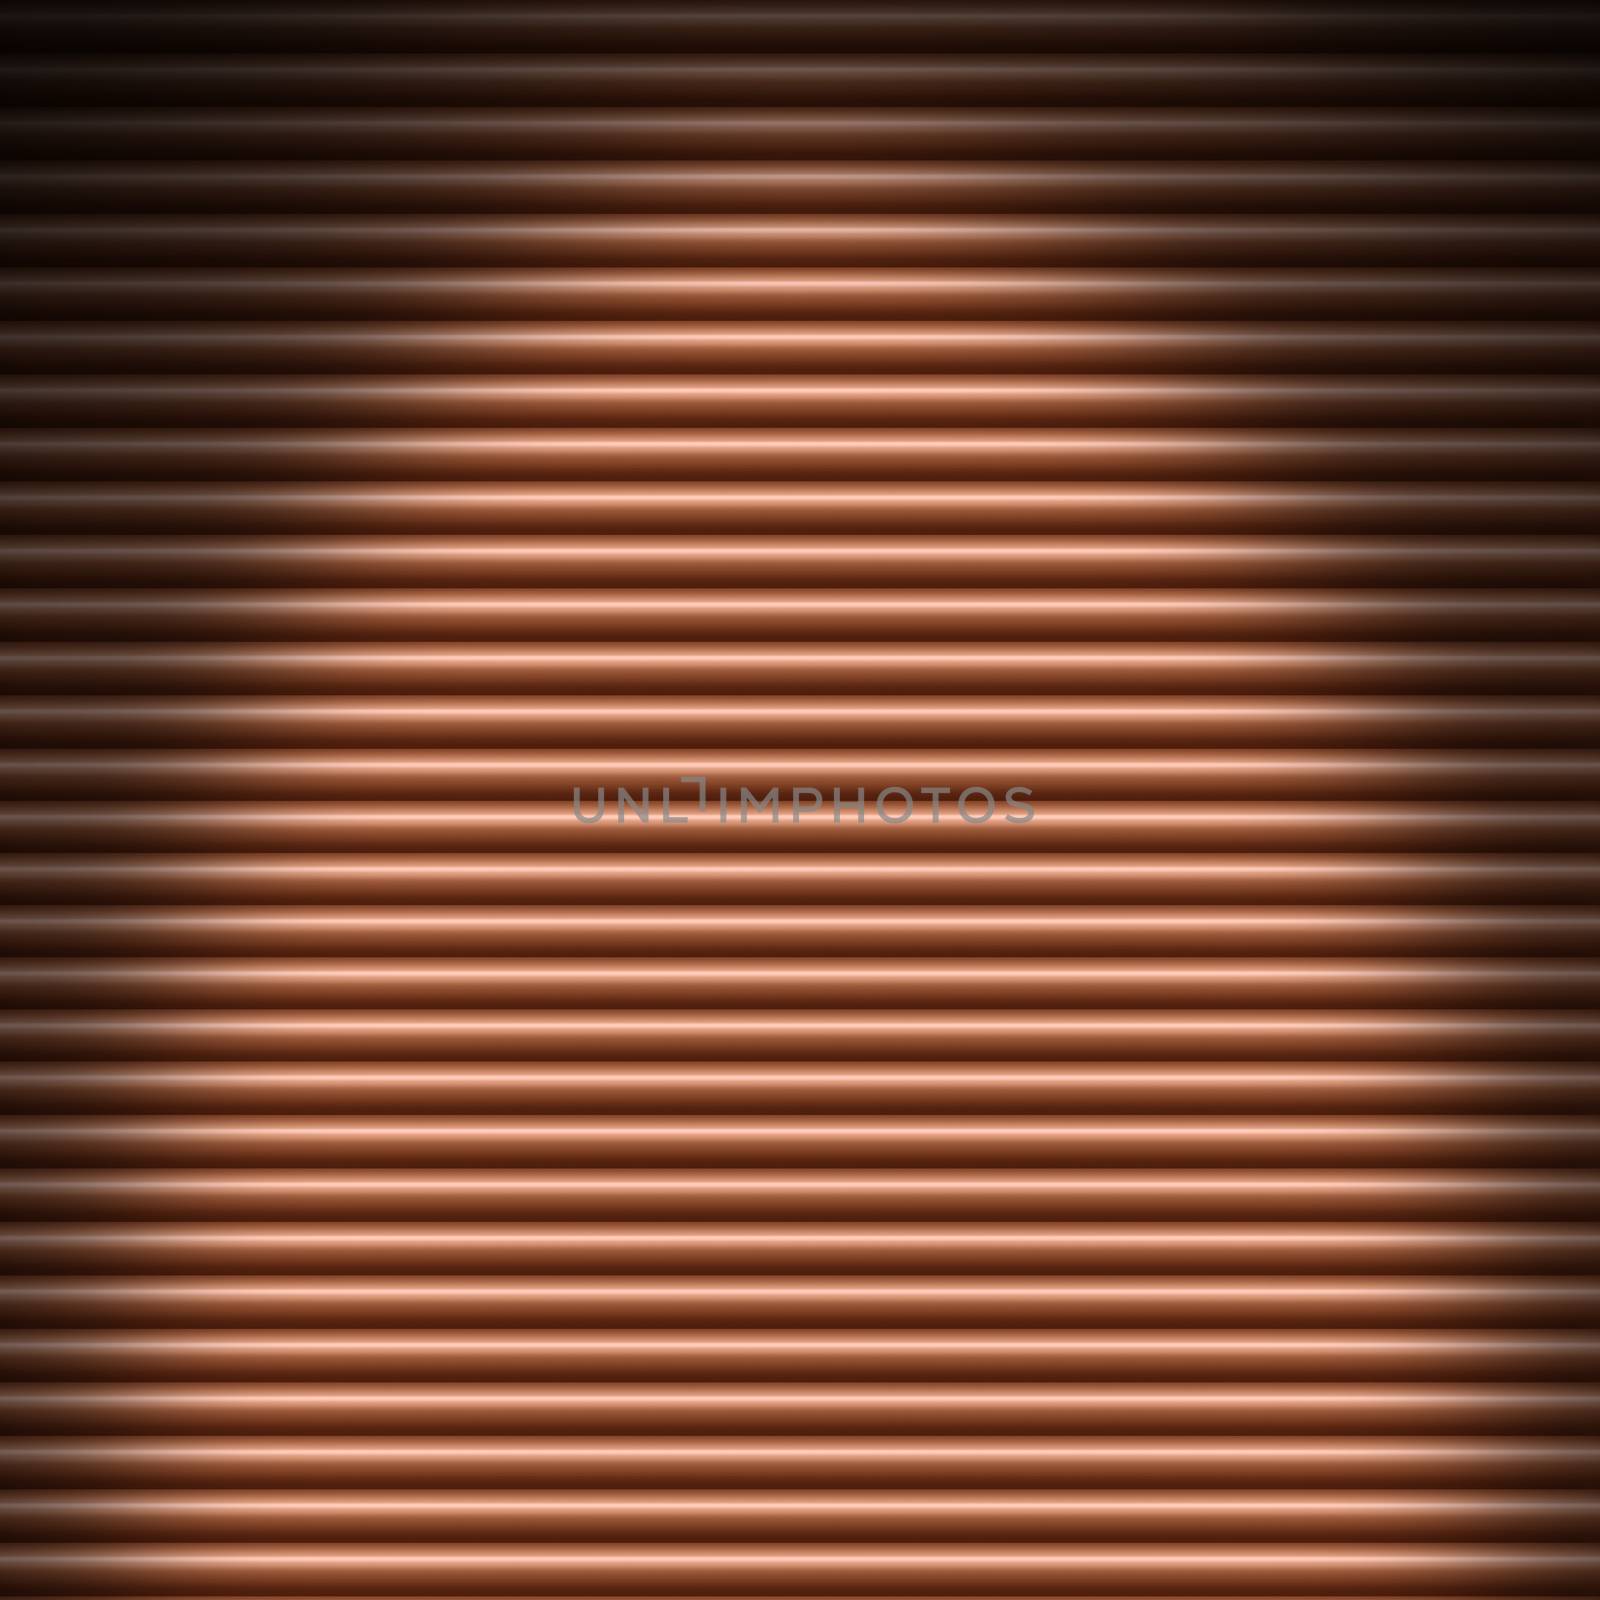 Copper-colored tube background texture lit from above by Balefire9